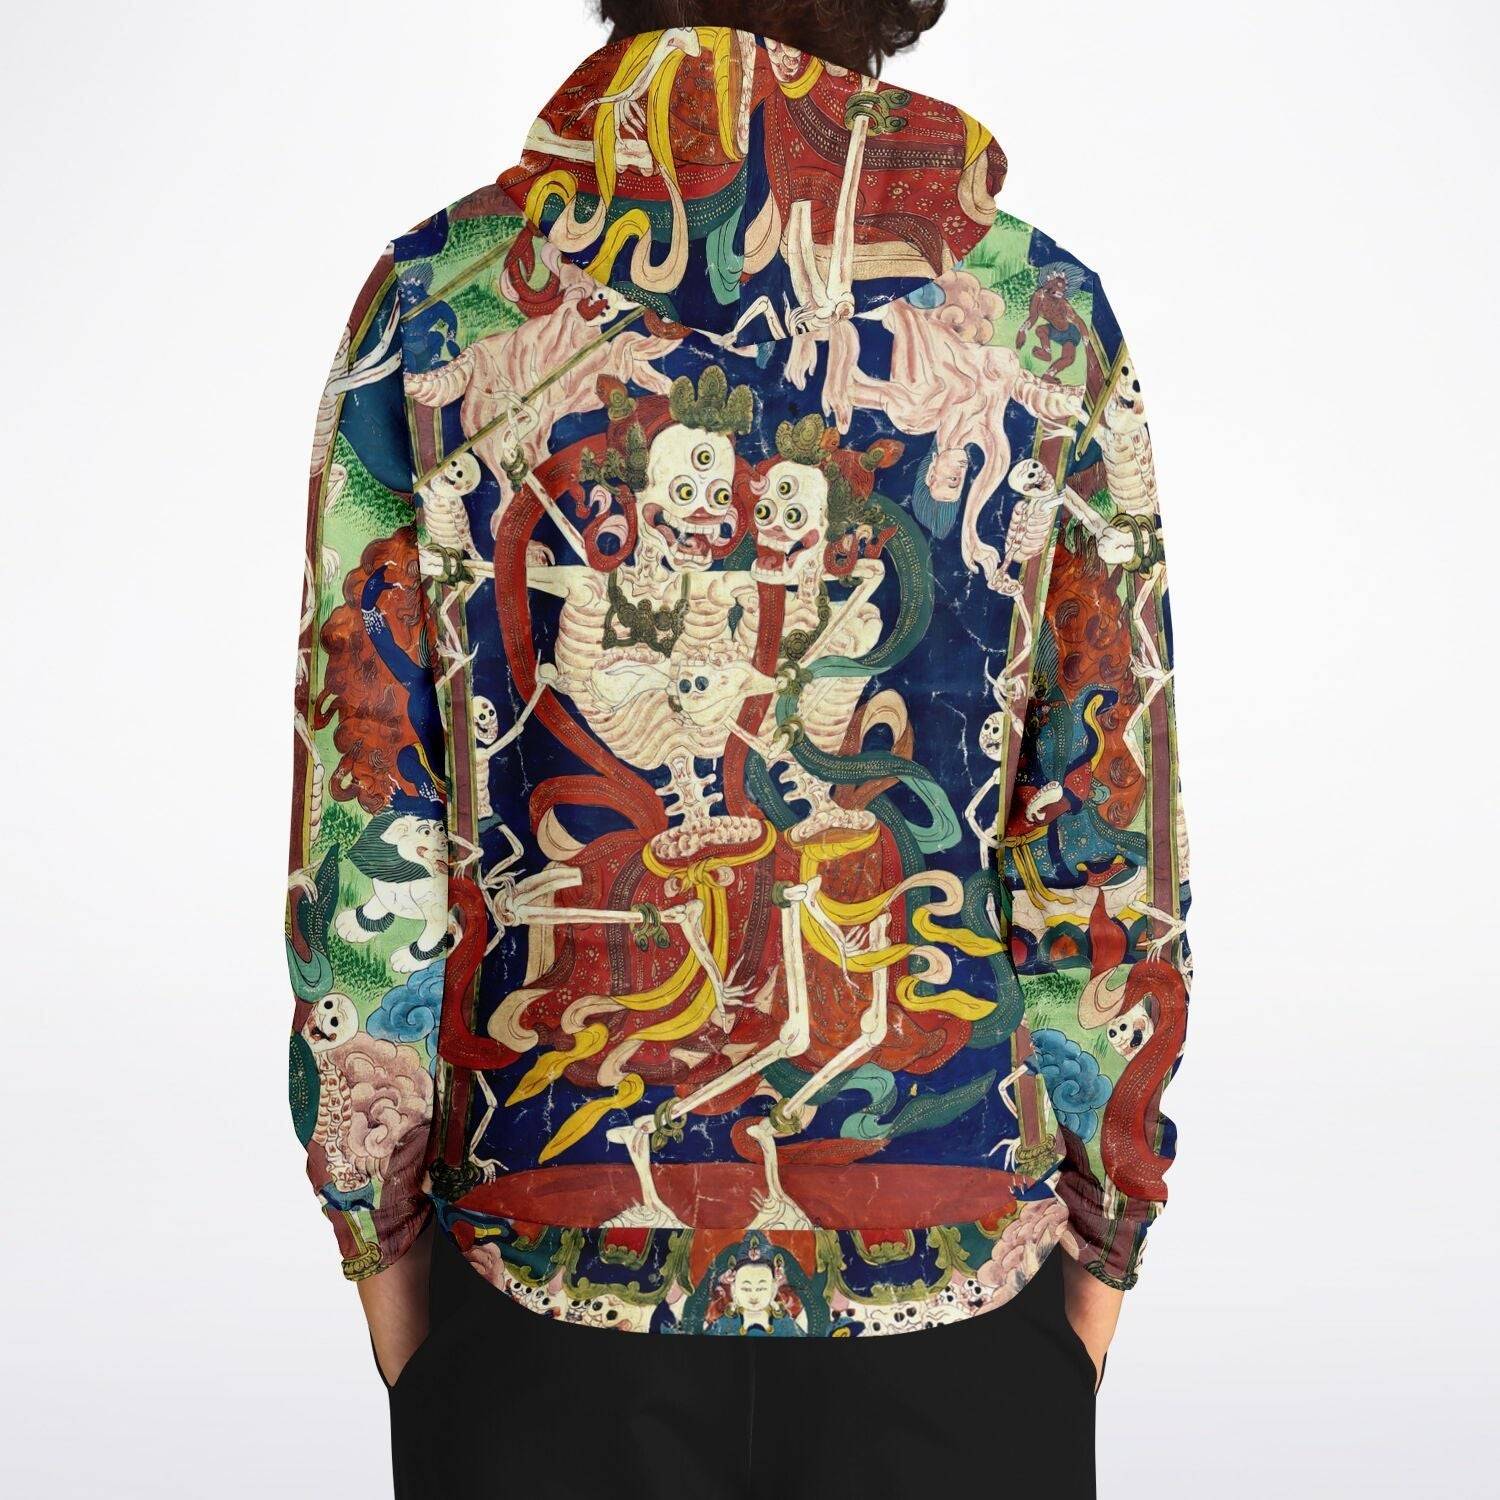 Citipati Skeleton Deity | Tibetan Buddhist Lords of the Cemetery | Dance of Death Skull All-Over-Print Art Hoodie - Sacred Surreal